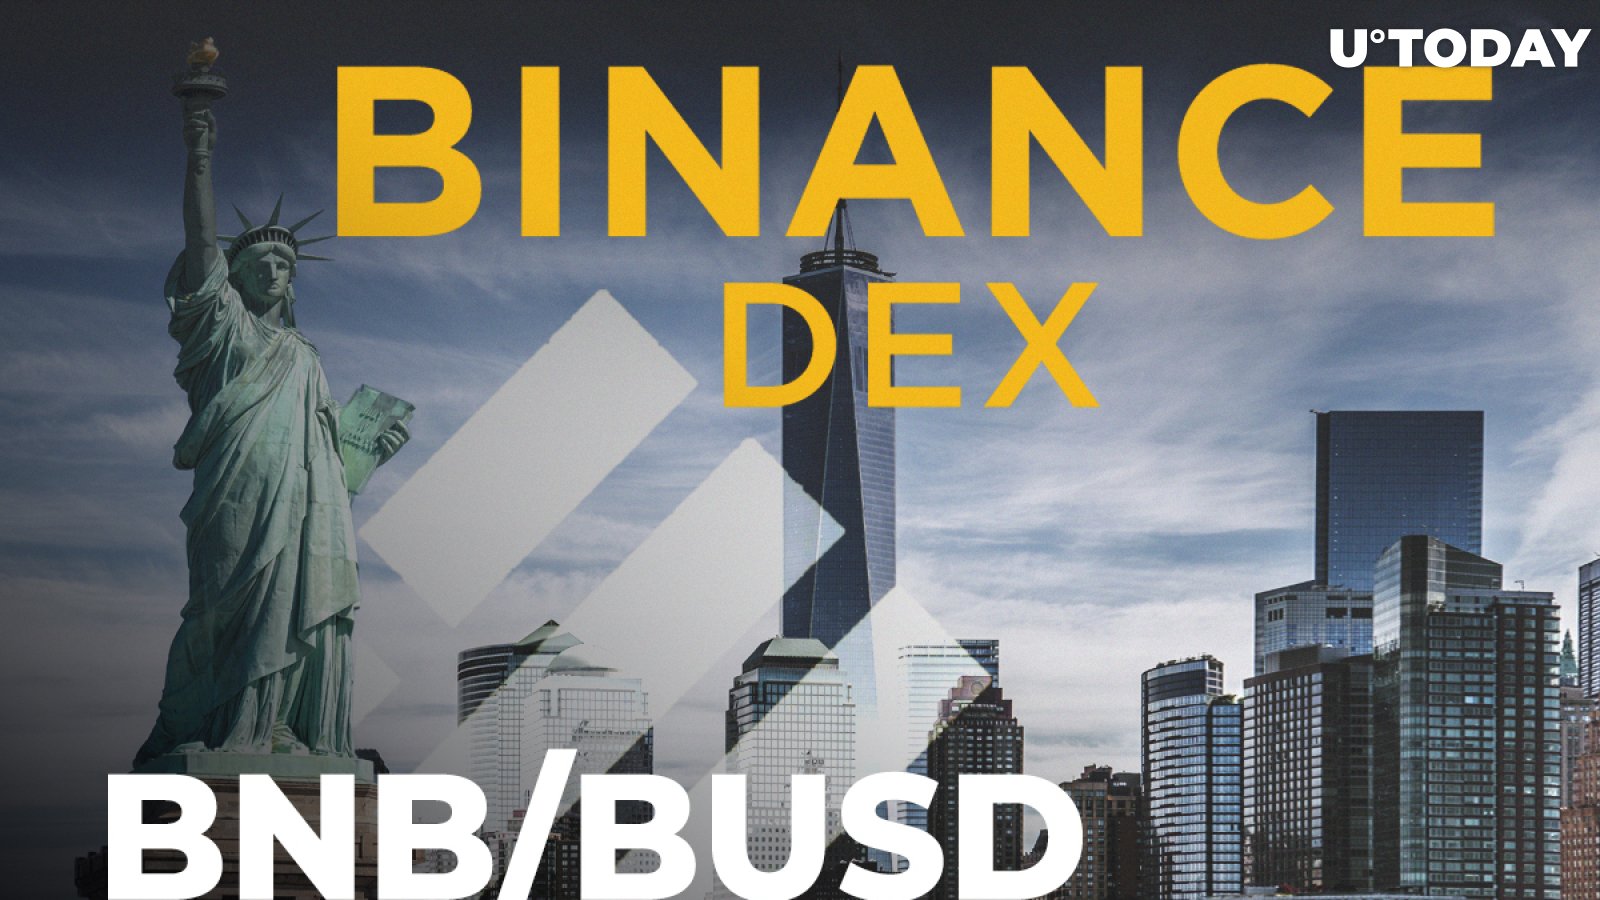 Binance DEX Pairs BNB with BUSD Stablecoin Approved by NY Regulators